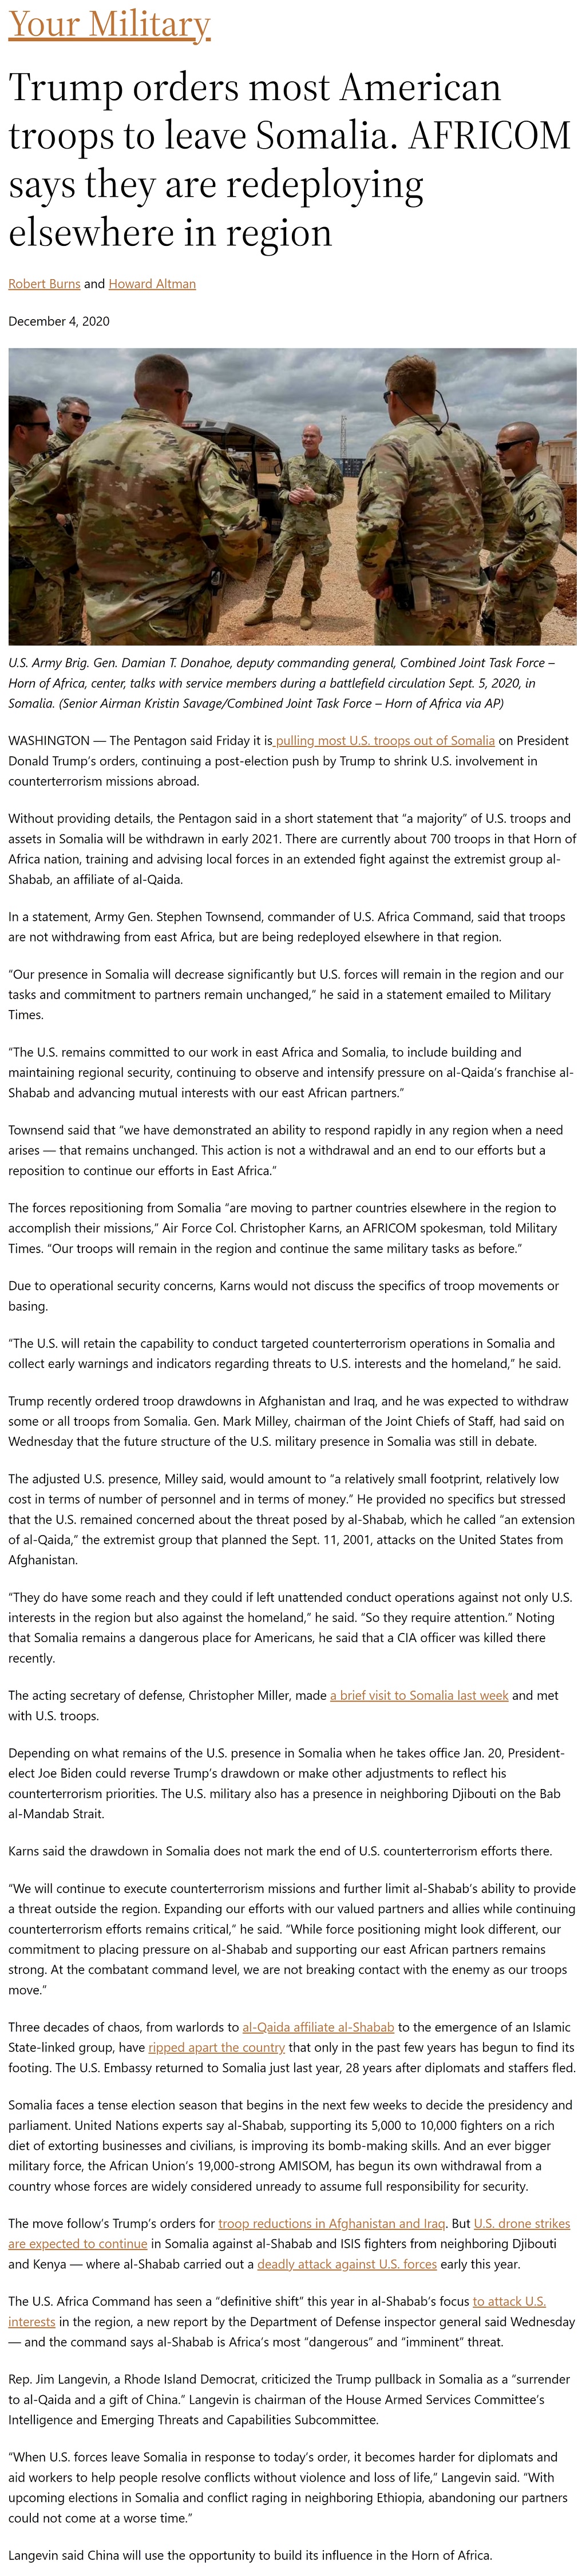 Trump orders most American troops to leave Somalia. AFRICOM says they are redeploying elsewhere in region by Robert Burns (AP) and Howard Altman, Military Times 12/4/2020